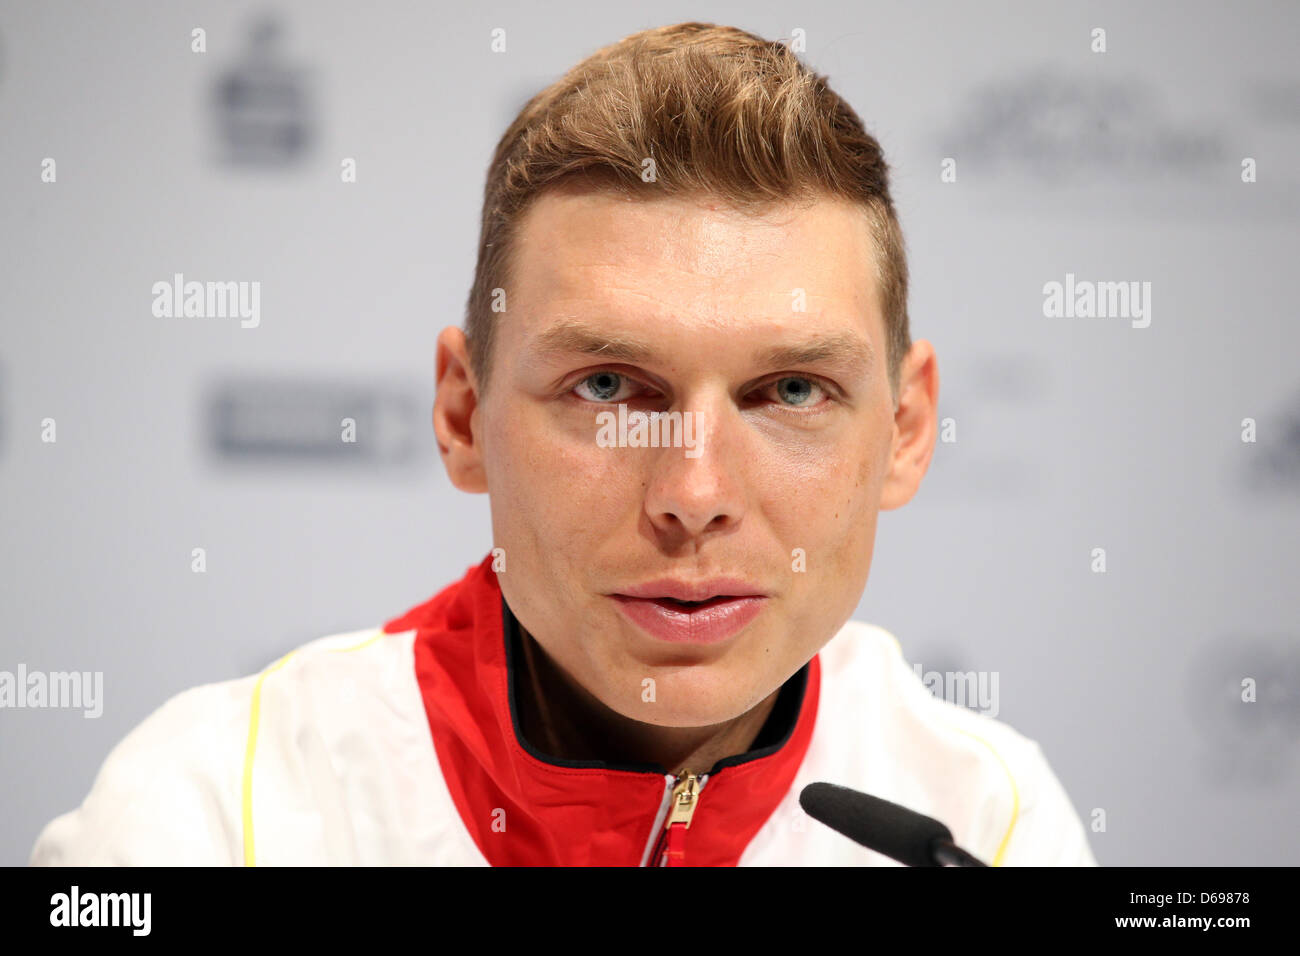 Germany's cyclist Tony Martin is pictured during a press conference in the german house at the London 2012 Olympic Games, London, Great Britain, 2 August 2012. Photo: Friso Gentsch dpa  +++(c) dpa - Bildfunk+++ Stock Photo